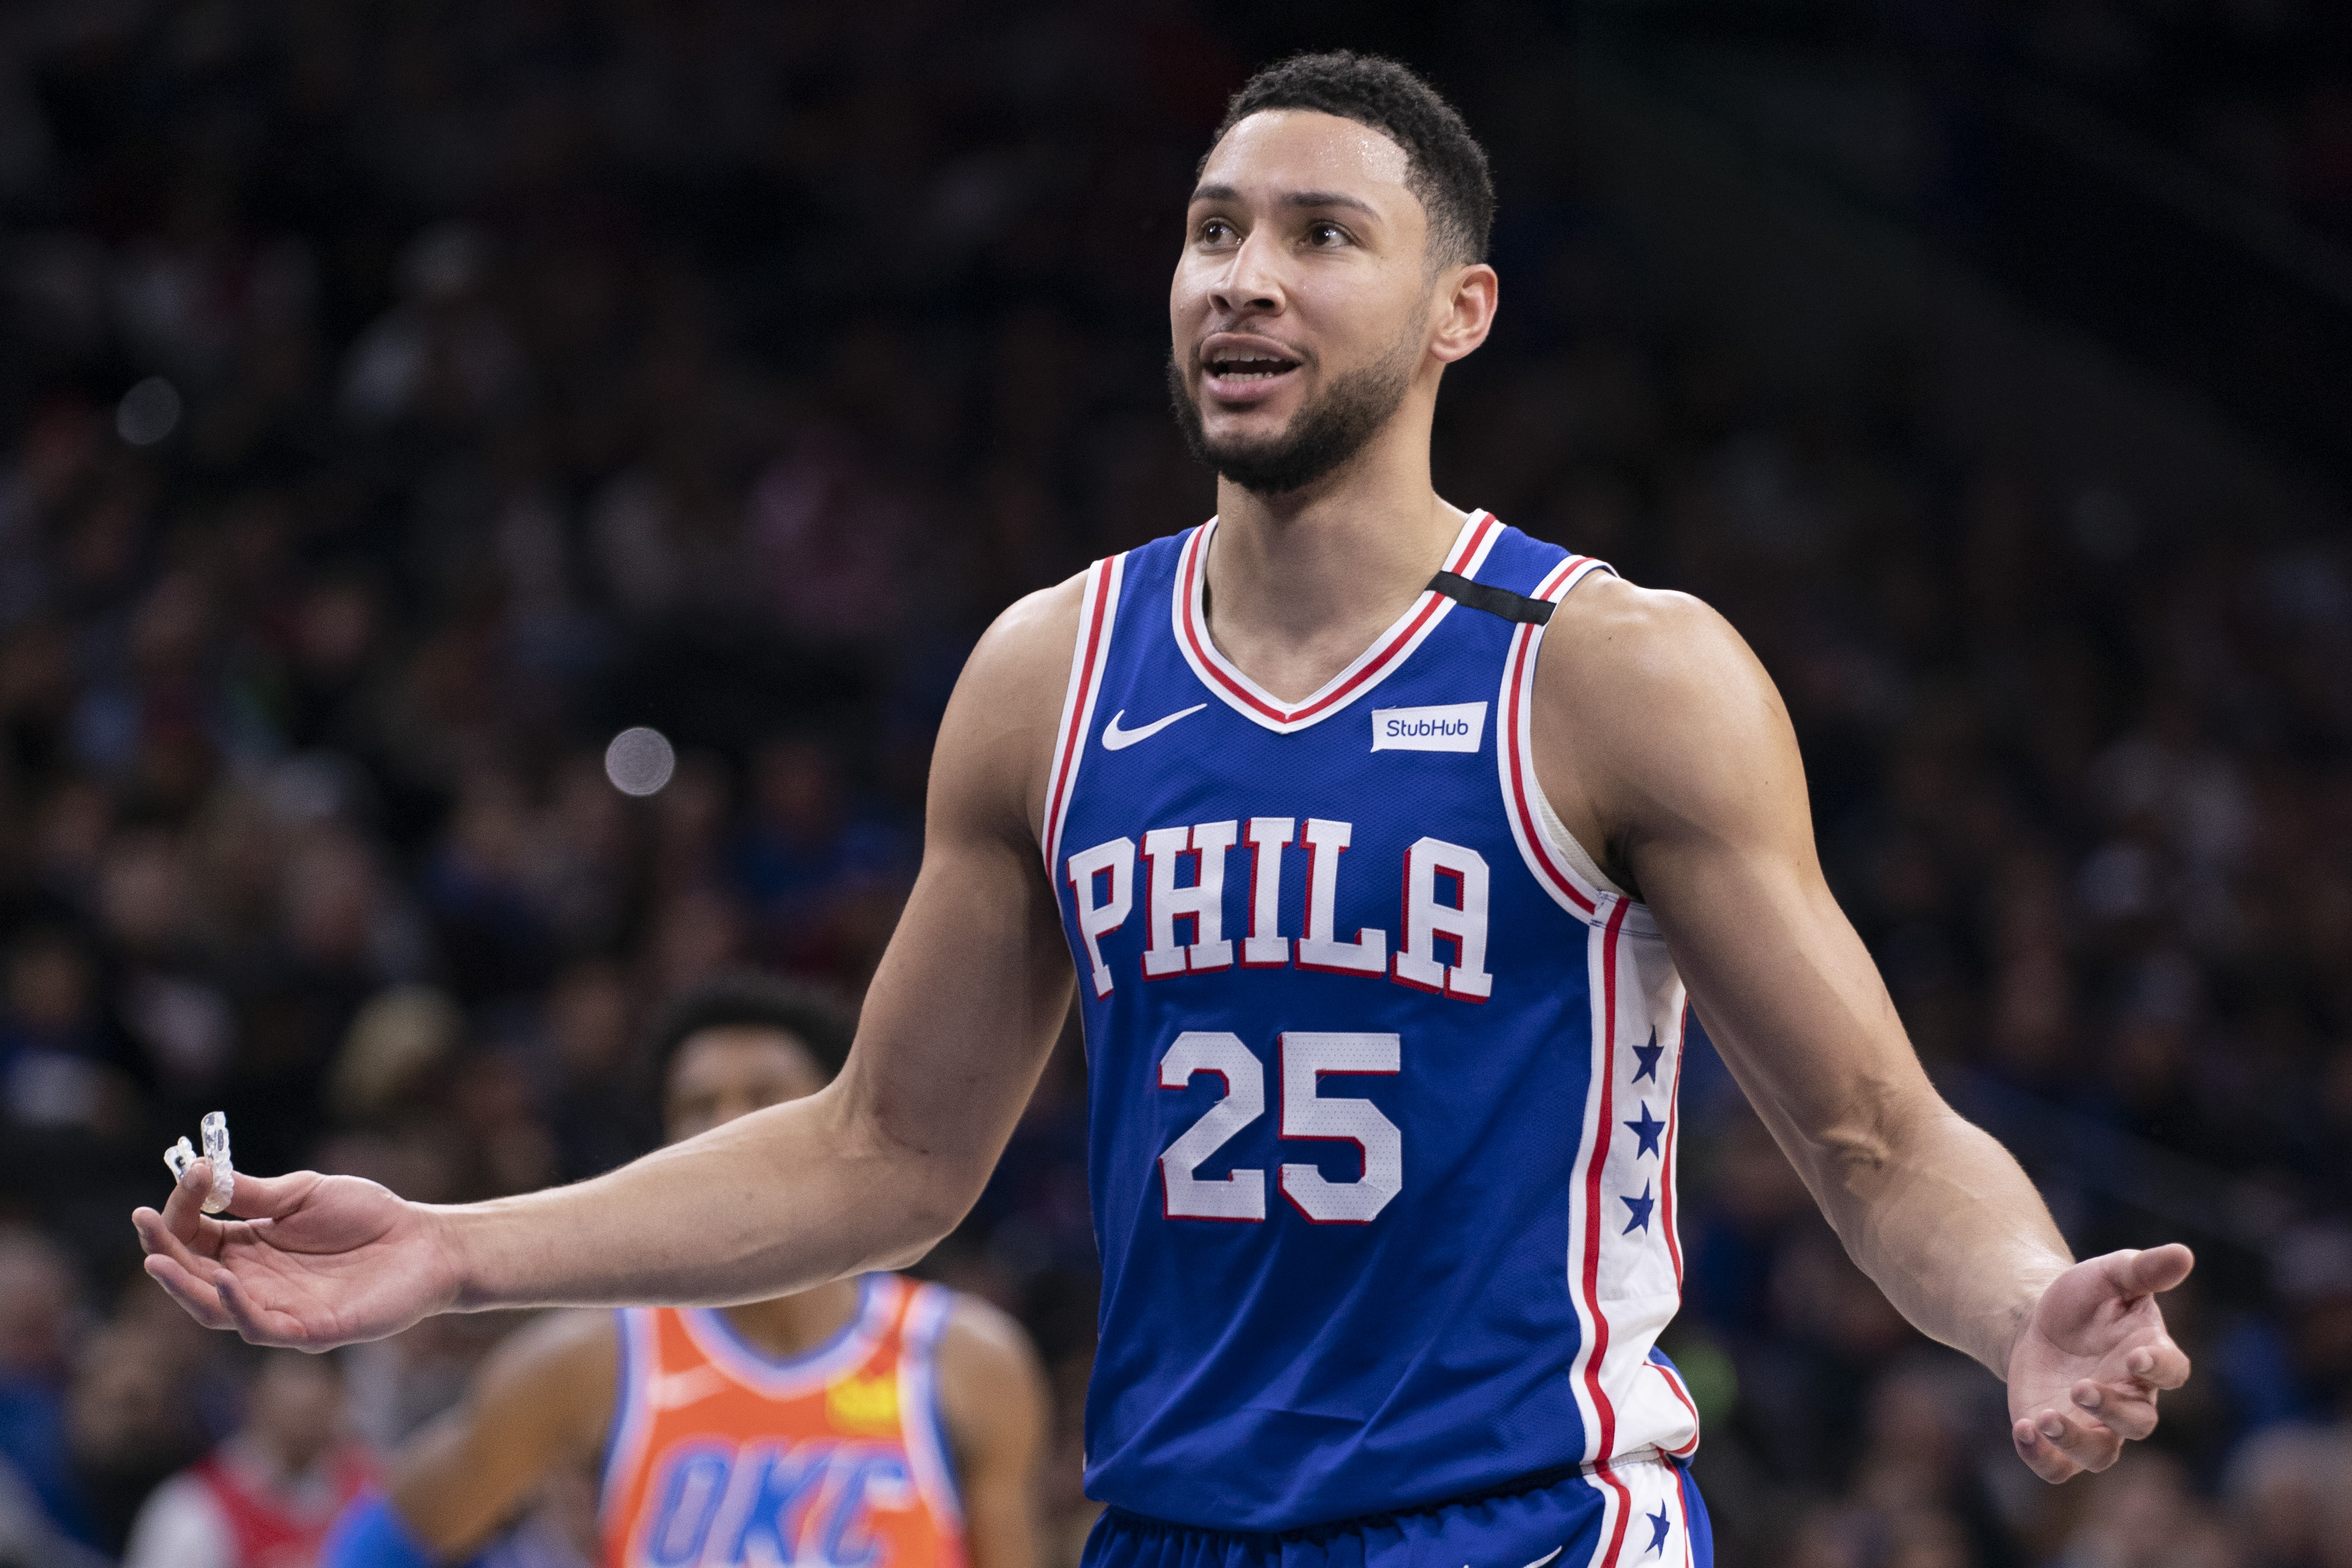 Ben Simmons (pictured here) snubbed from the 2020 NBA All-Star starting lineups